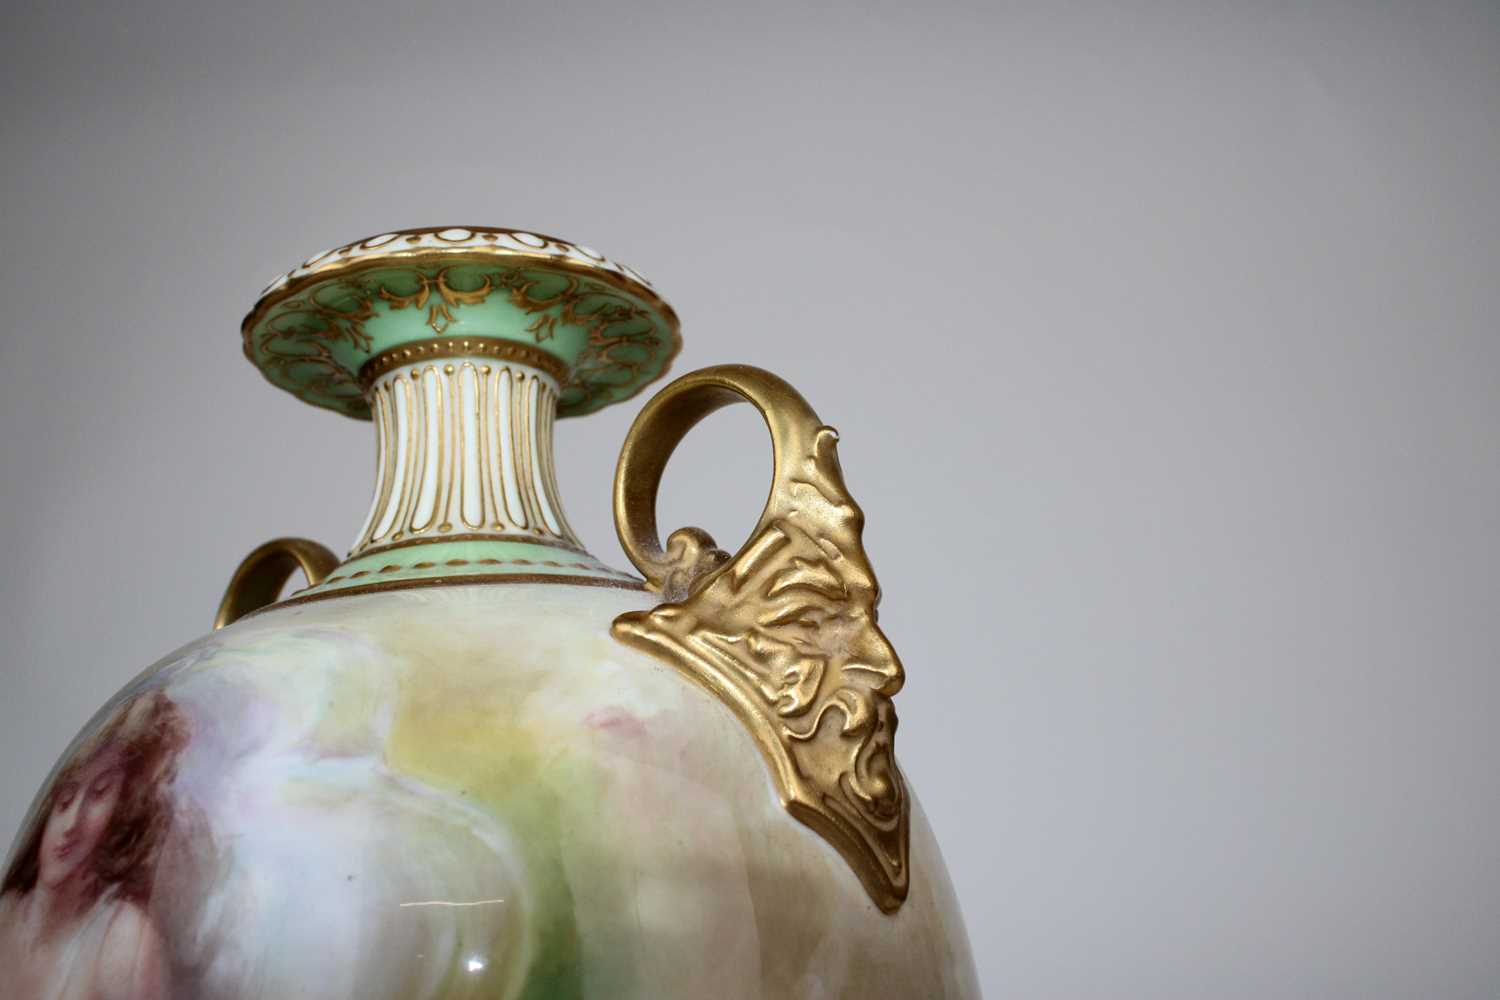 George White for Royal Doulton "Leda and the Swan" Urn - Image 13 of 20